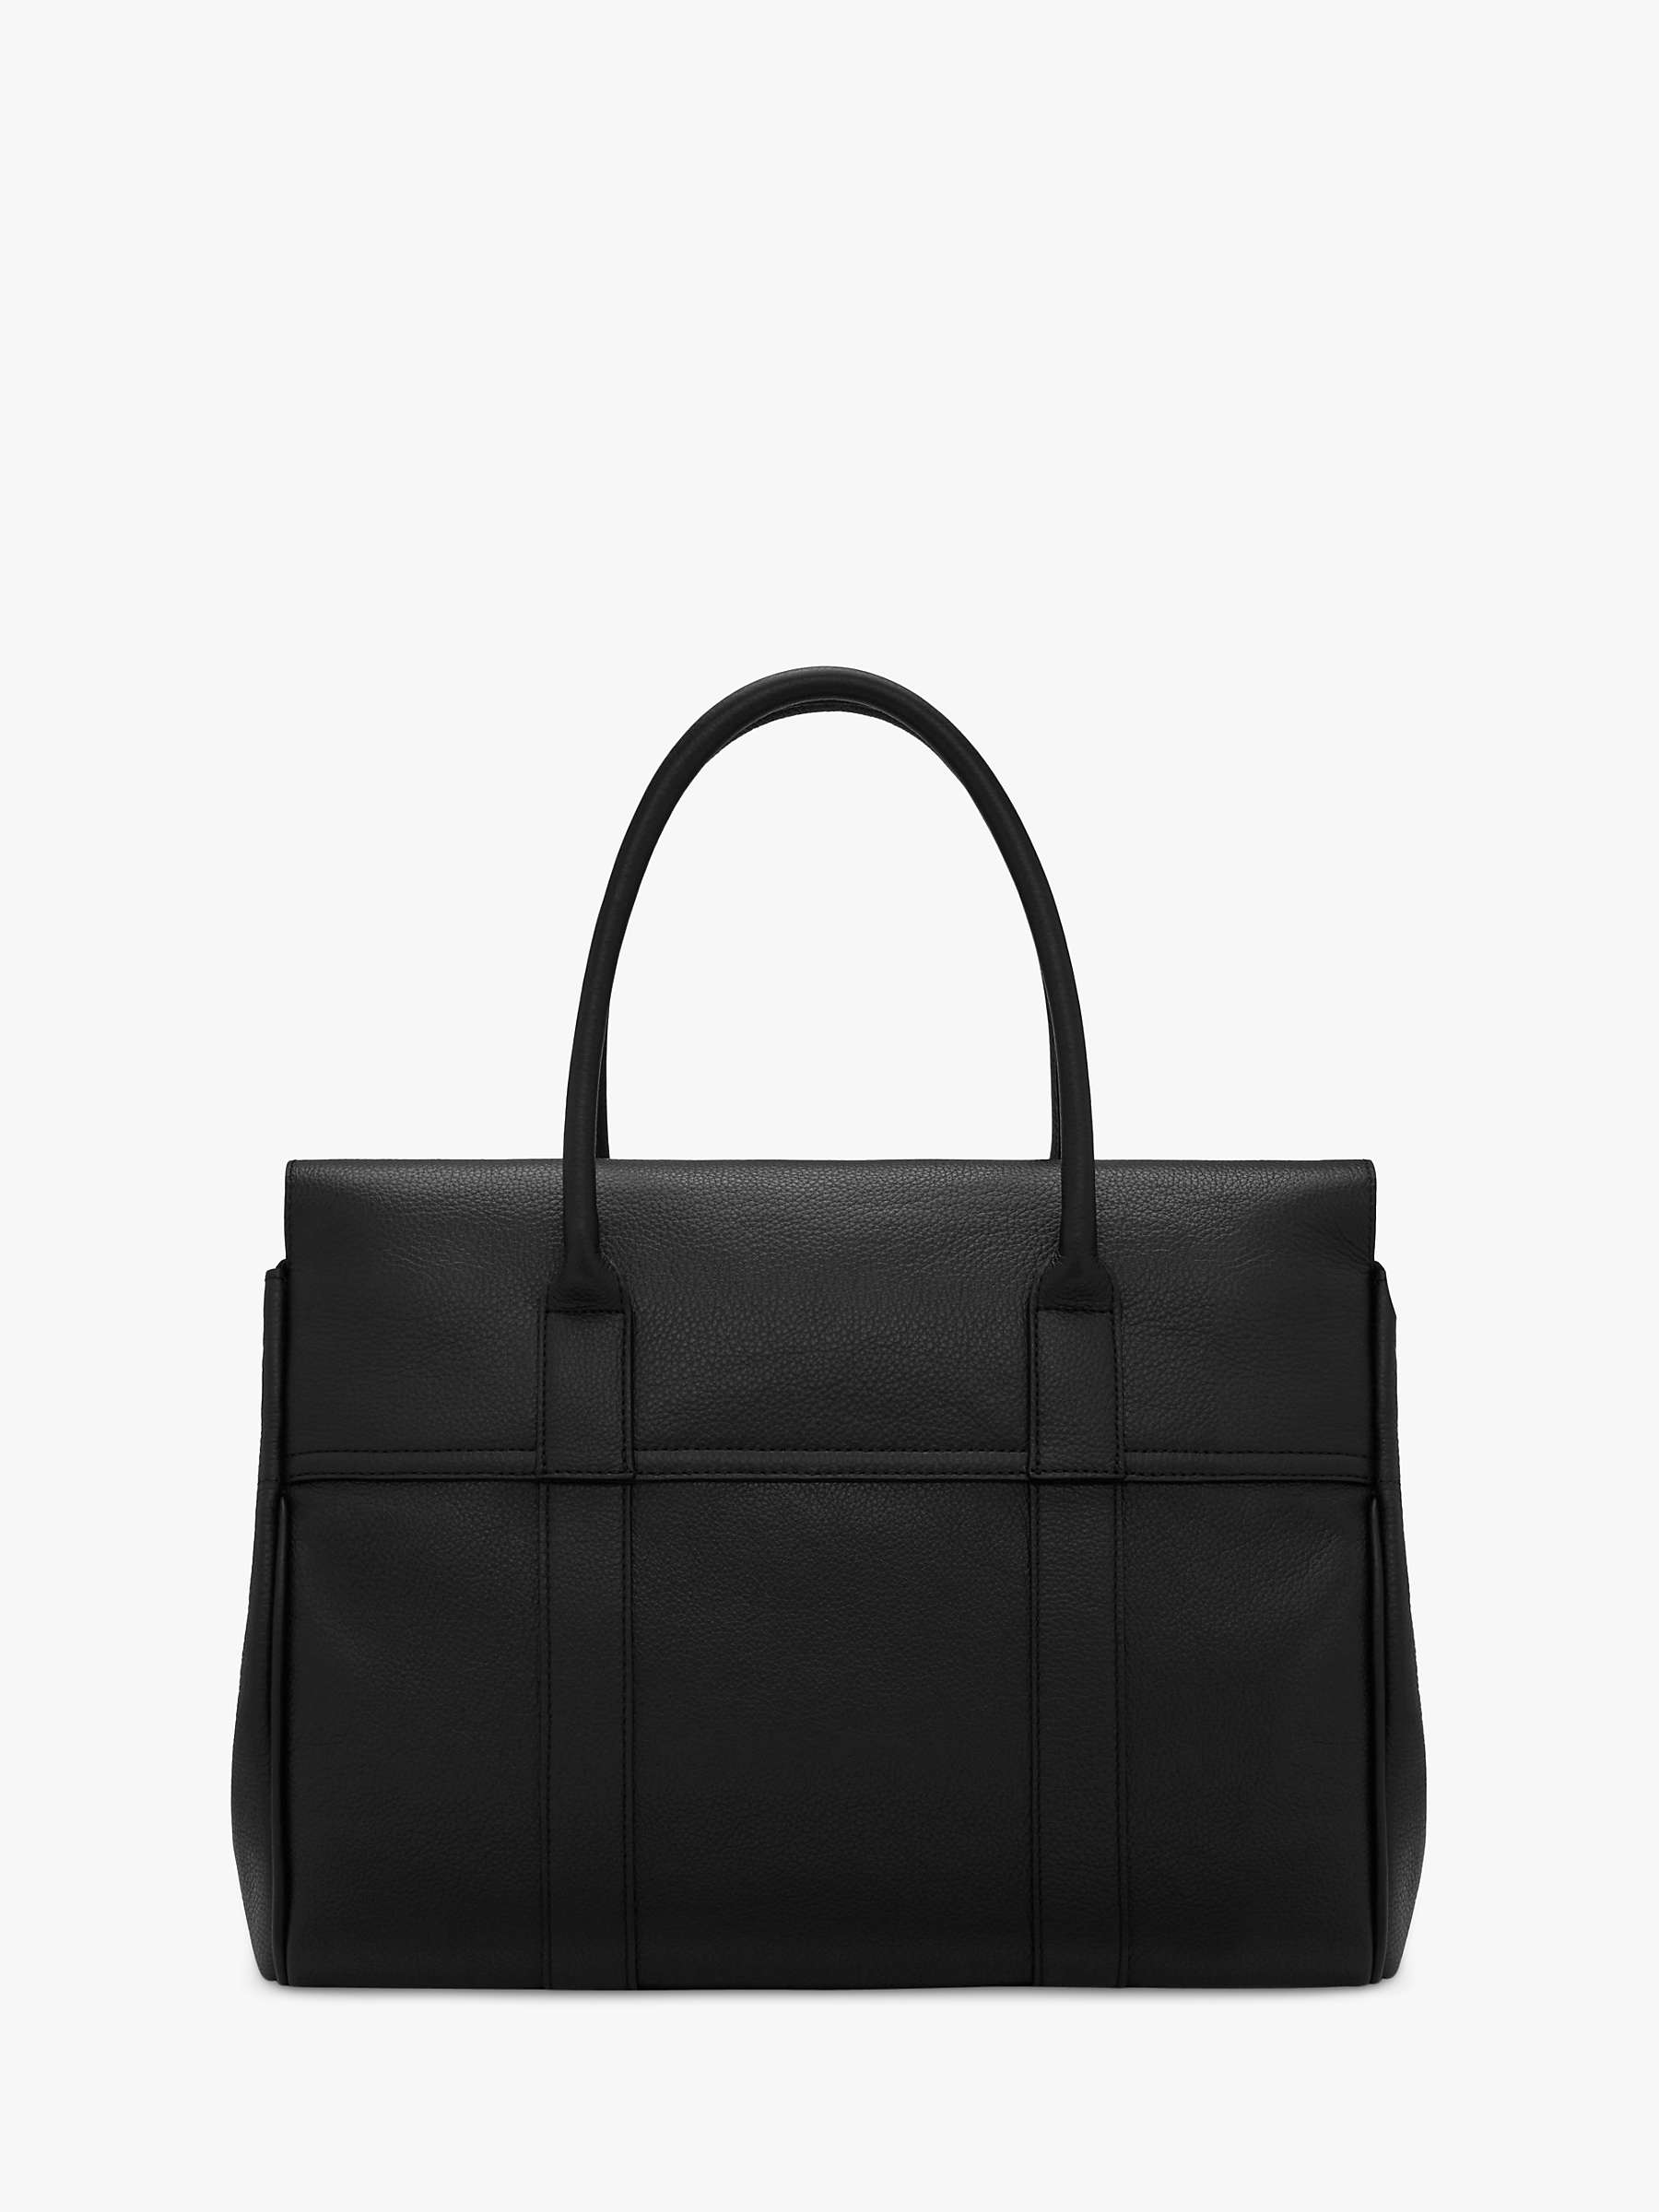 Buy Mulberry Bayswater Classic Grain Leather Handbag Online at johnlewis.com